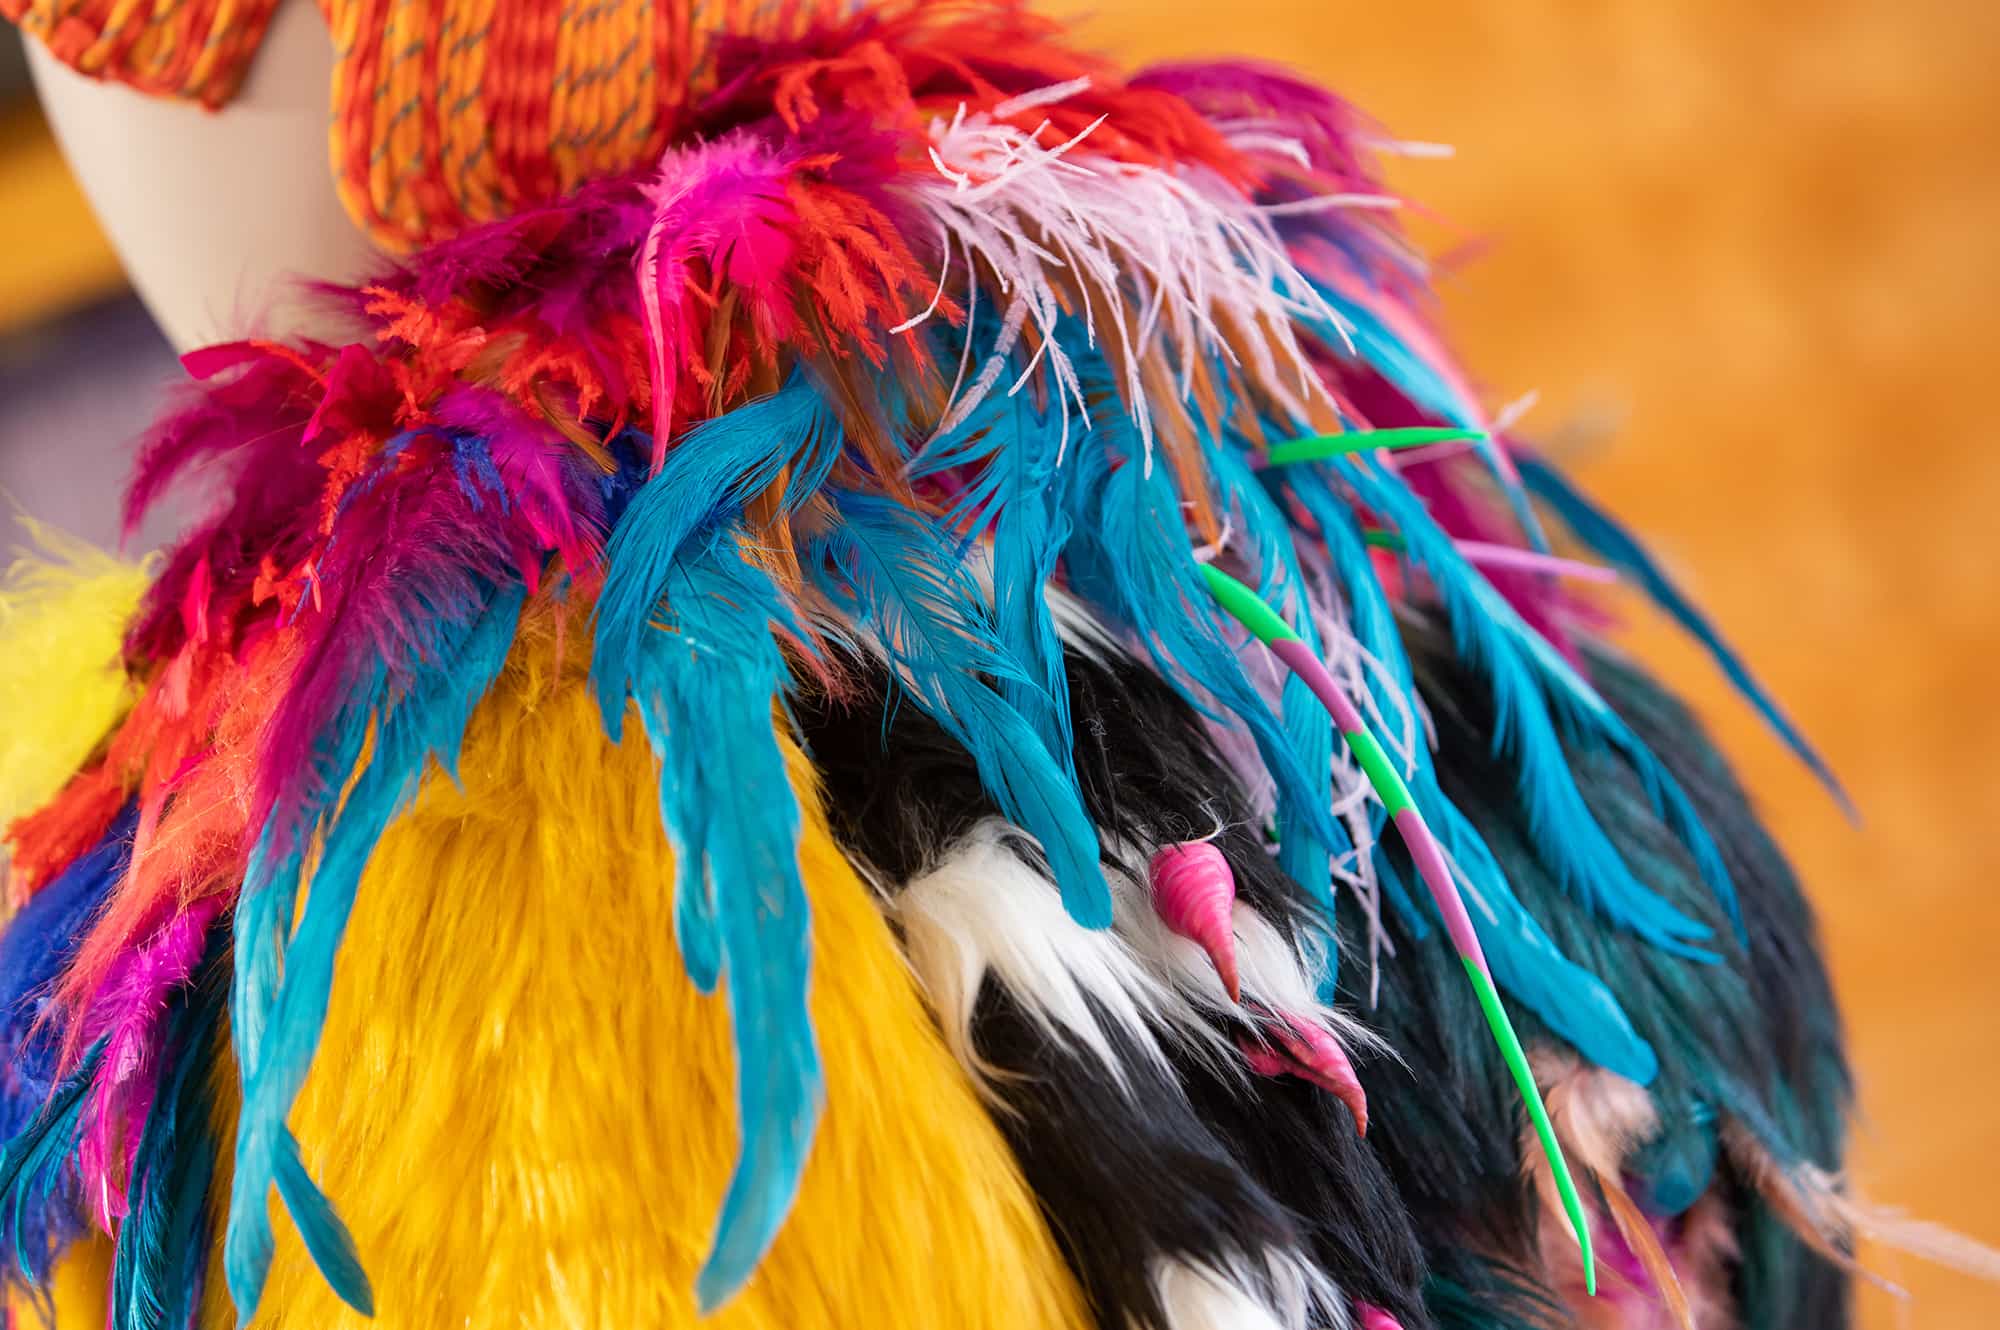 Close up of a costume with feathers and fur by Stephanie Shaw, show at Oxo Tower | Photographer: David Poultney